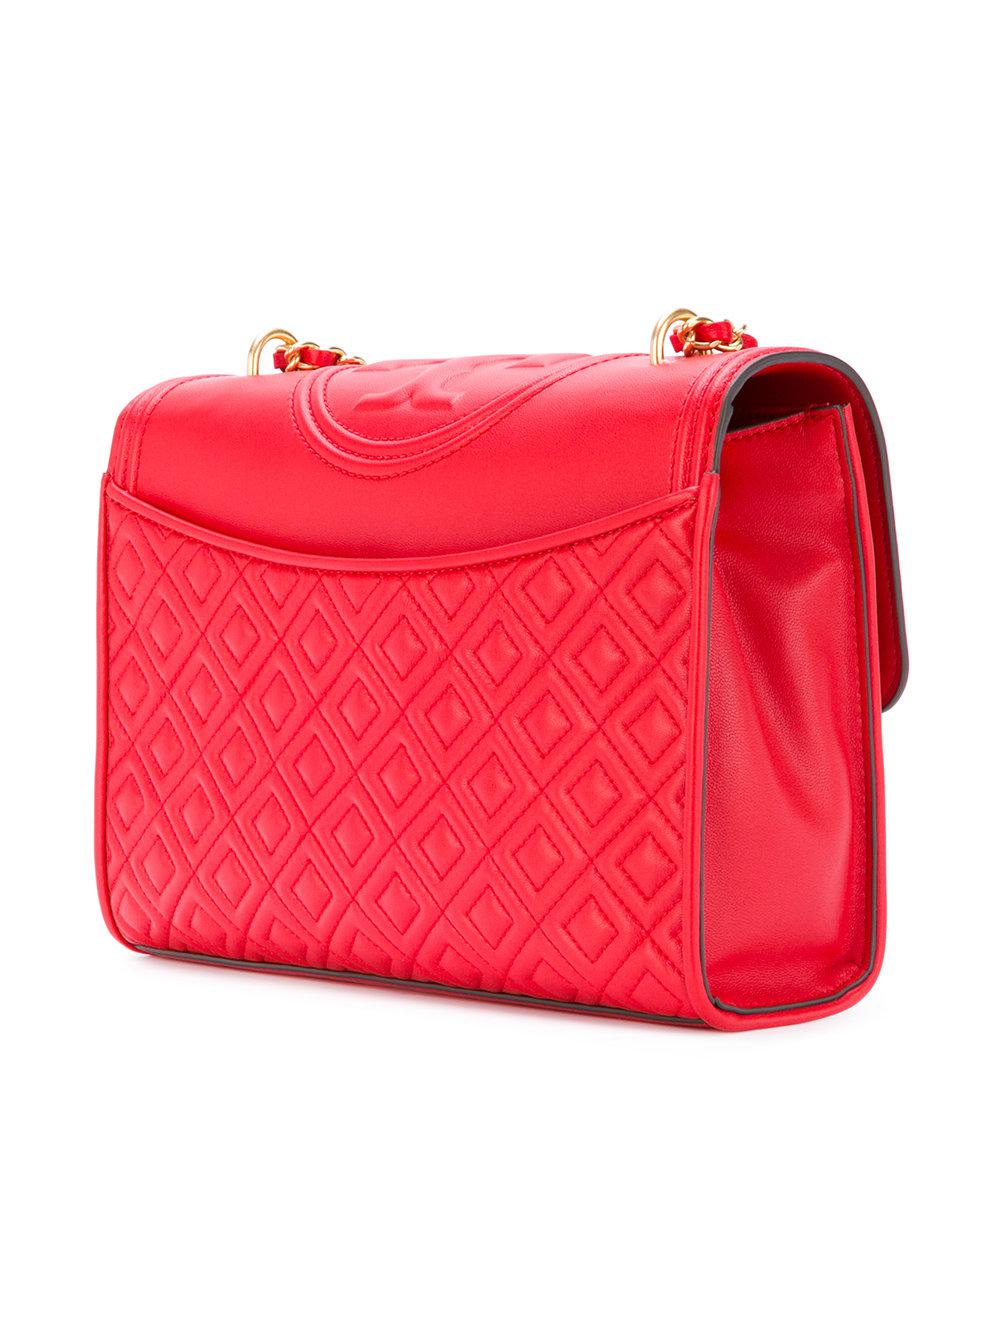 Tory Burch Fleming Convertible Shoulder Bag in Red | Lyst